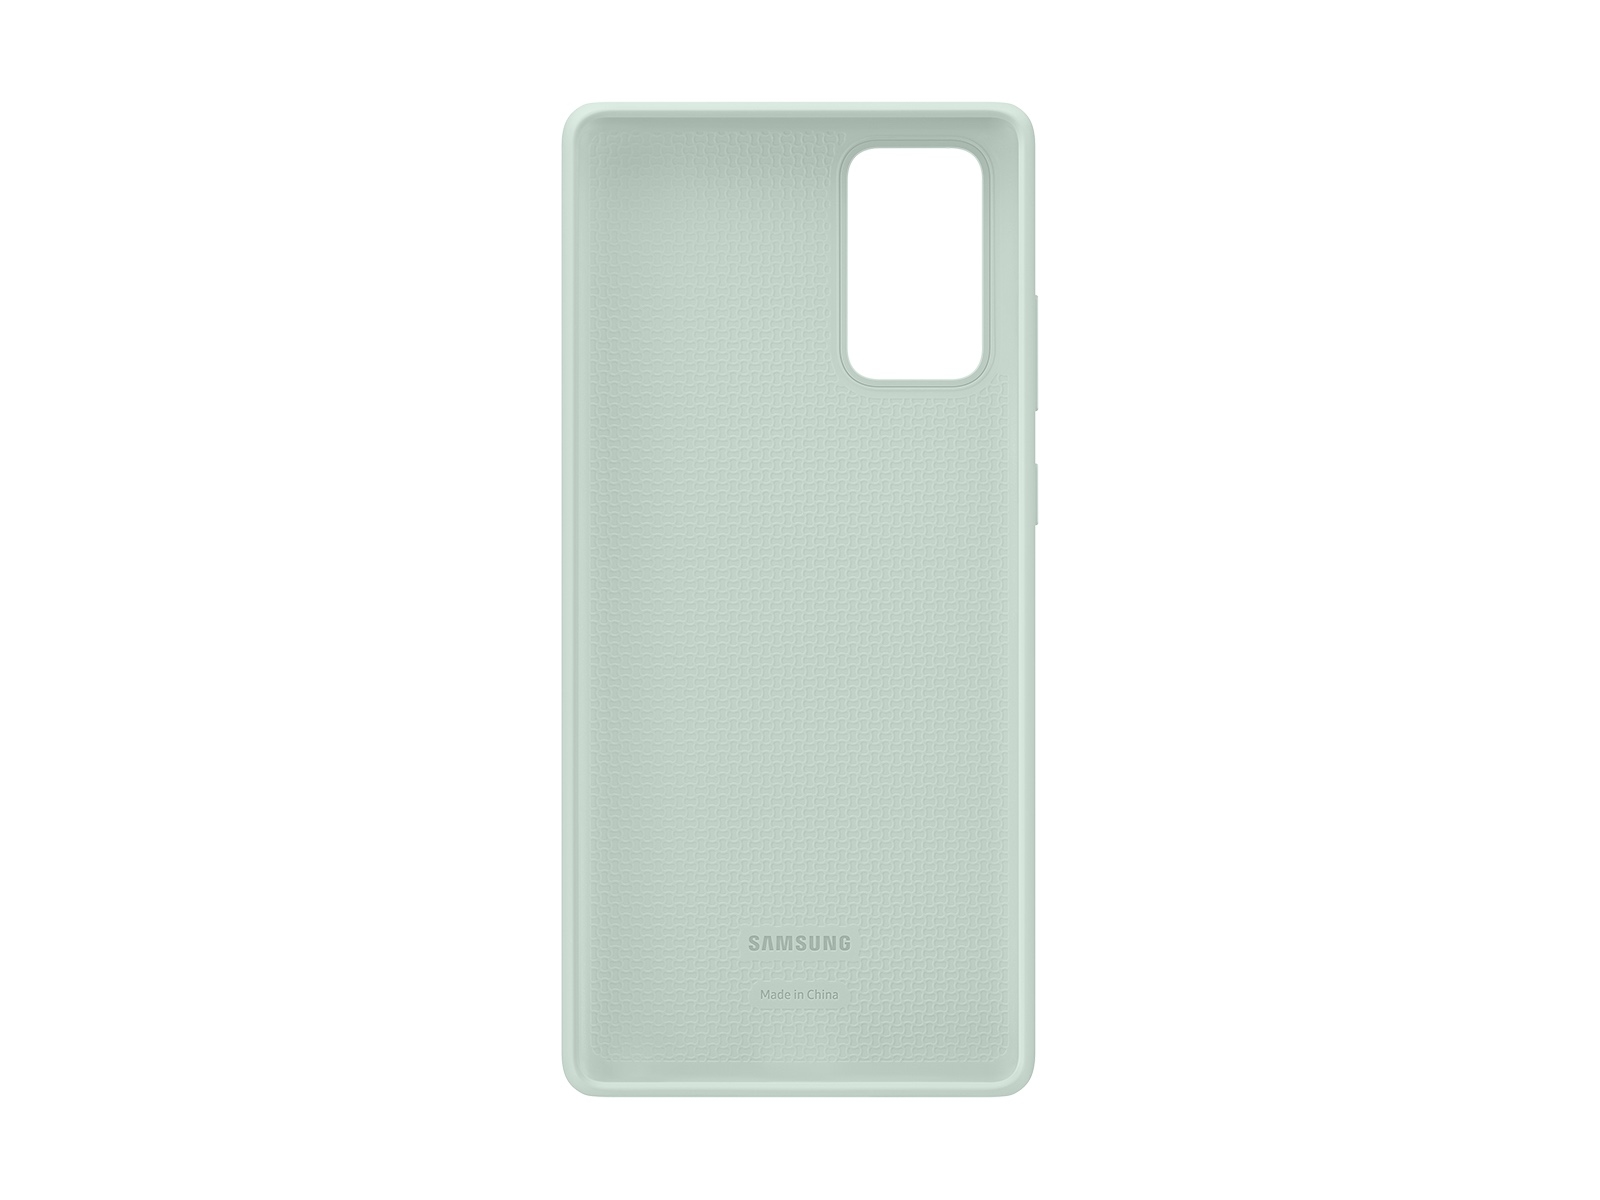 Thumbnail image of Galaxy Note20 5G Silicone Cover, Mint